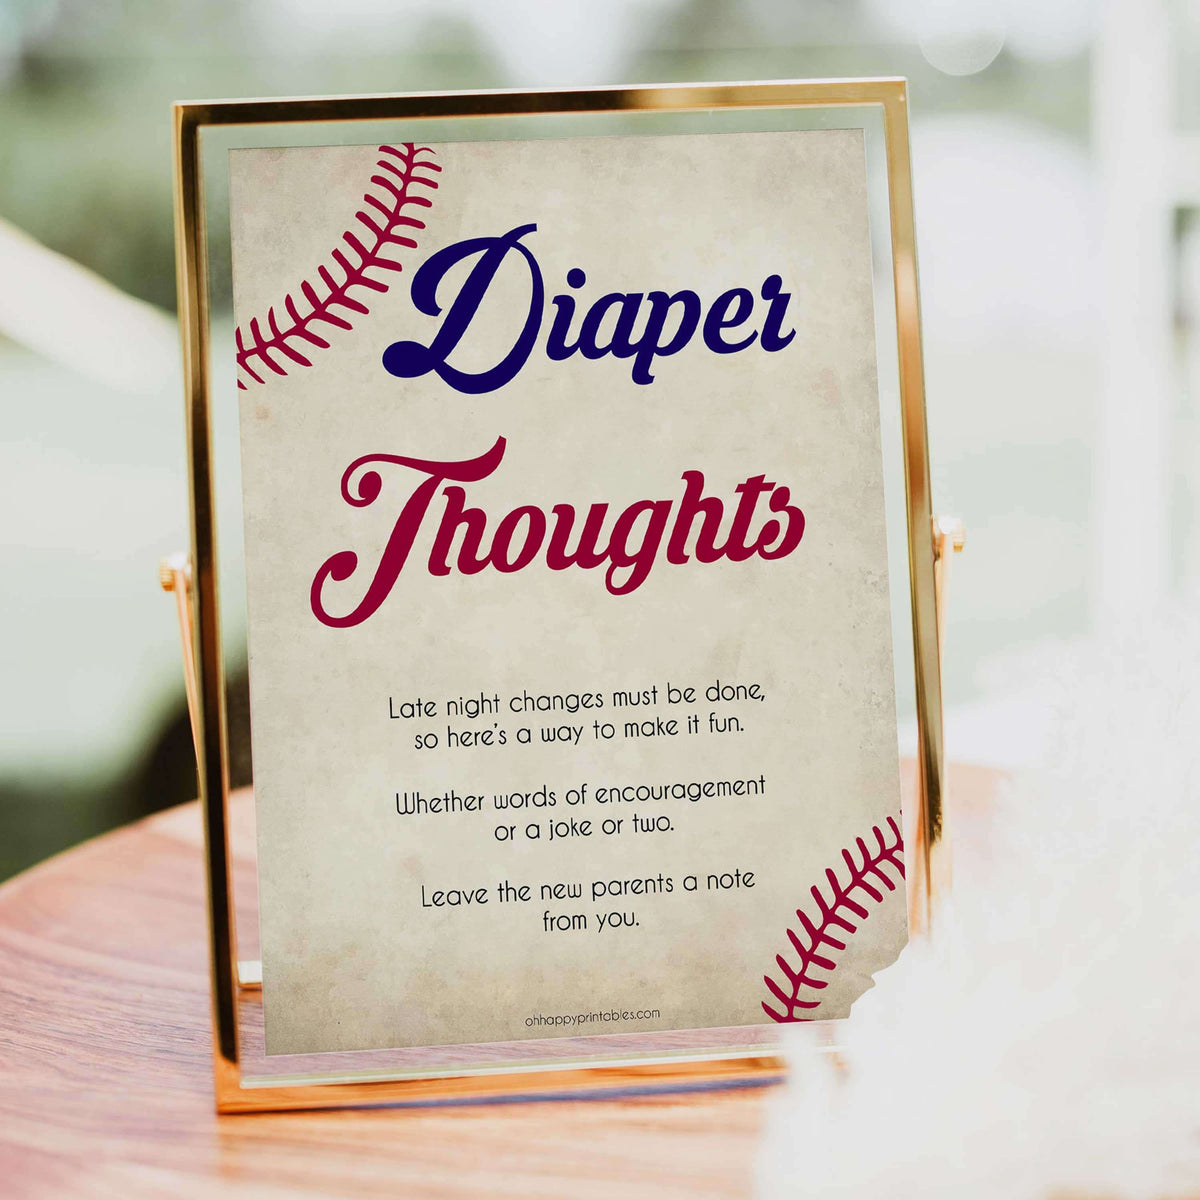 baseball diaper thoughts baby shower games, diaper thoughts, baby shower games, printable baby shower games, fun baby shower games, popular baby shower games